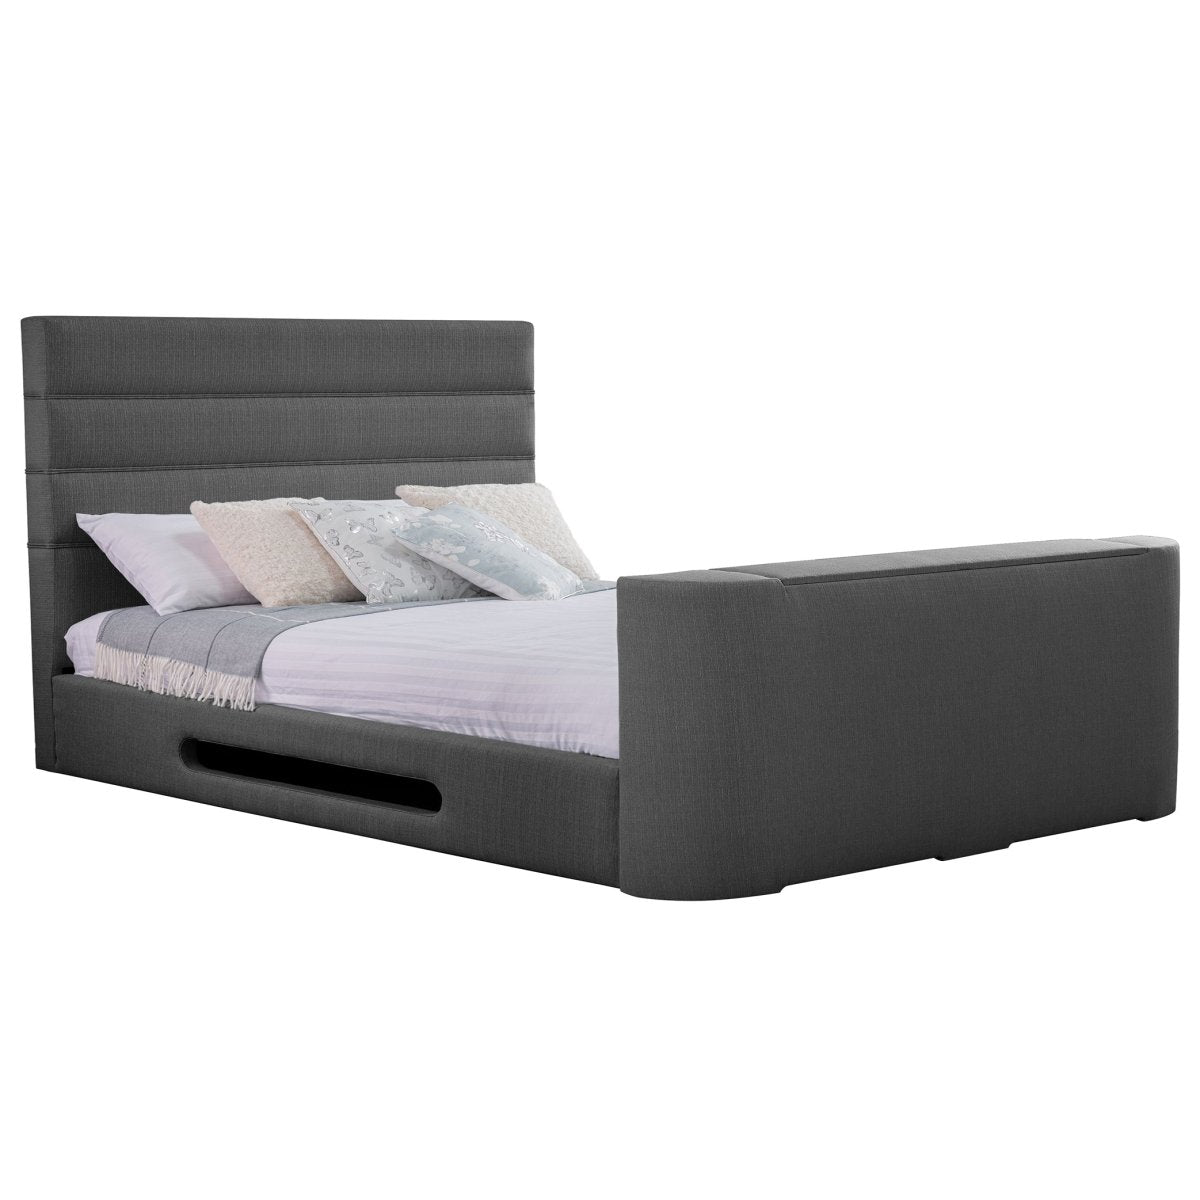 Sweet Dreams Mazarine Standard TV Bed frame - TV Beds Northwest - INMAZ-STD-135-SHER DUCK EGG - choose your colour tvbed - doubletvbed